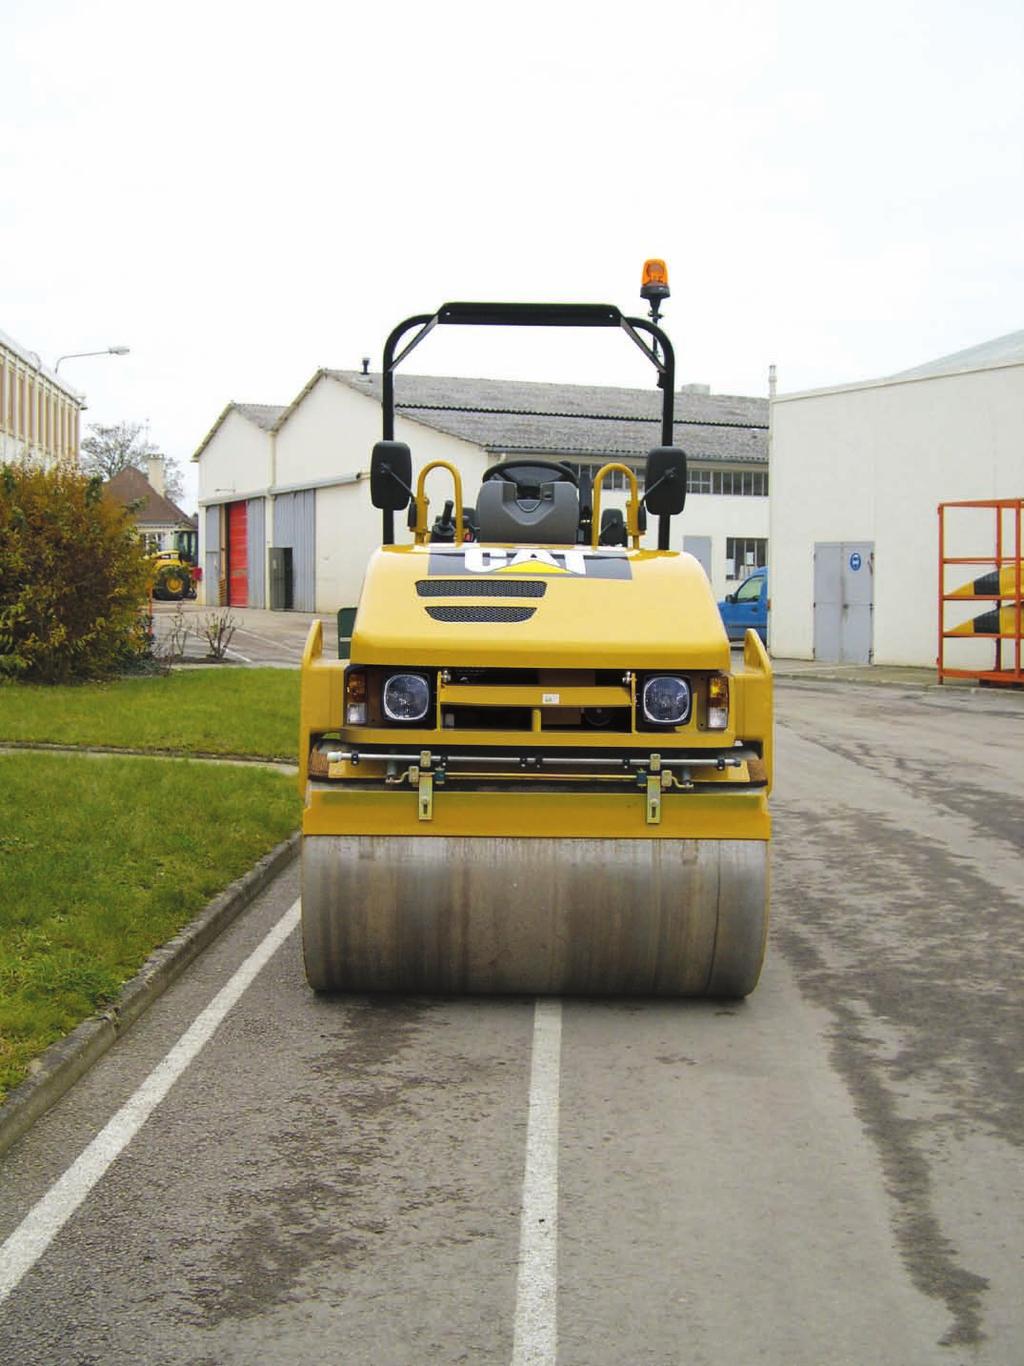 Wider drums, increased amplitude and dual frequency balanced with the amplitude setting makes this machine an excellent choice of machinery on thin asphalt lift mats and larger job sites.